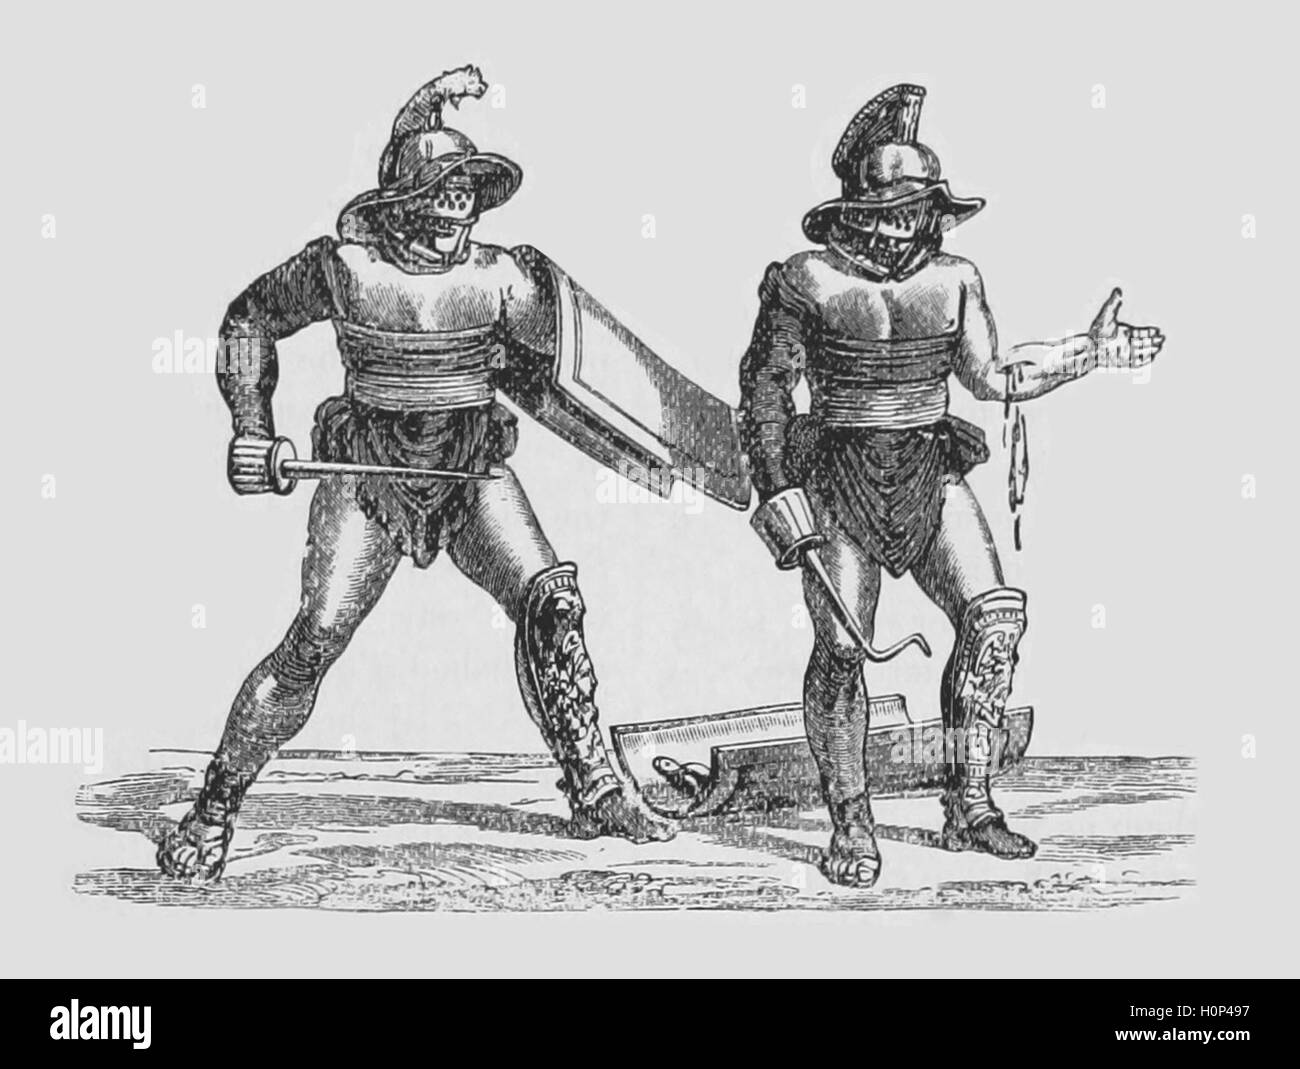 Two Roman Gladiators  A gladiator was an armed combatant who entertained audiences in the Roman Republic and Roman Empire in violent confrontations with other gladiators. Seen here in an illustration from a picture outside the colosseum in Pompeii.  Image sourced from Cassell's Illustrated Universal History (1893). Stock Photo